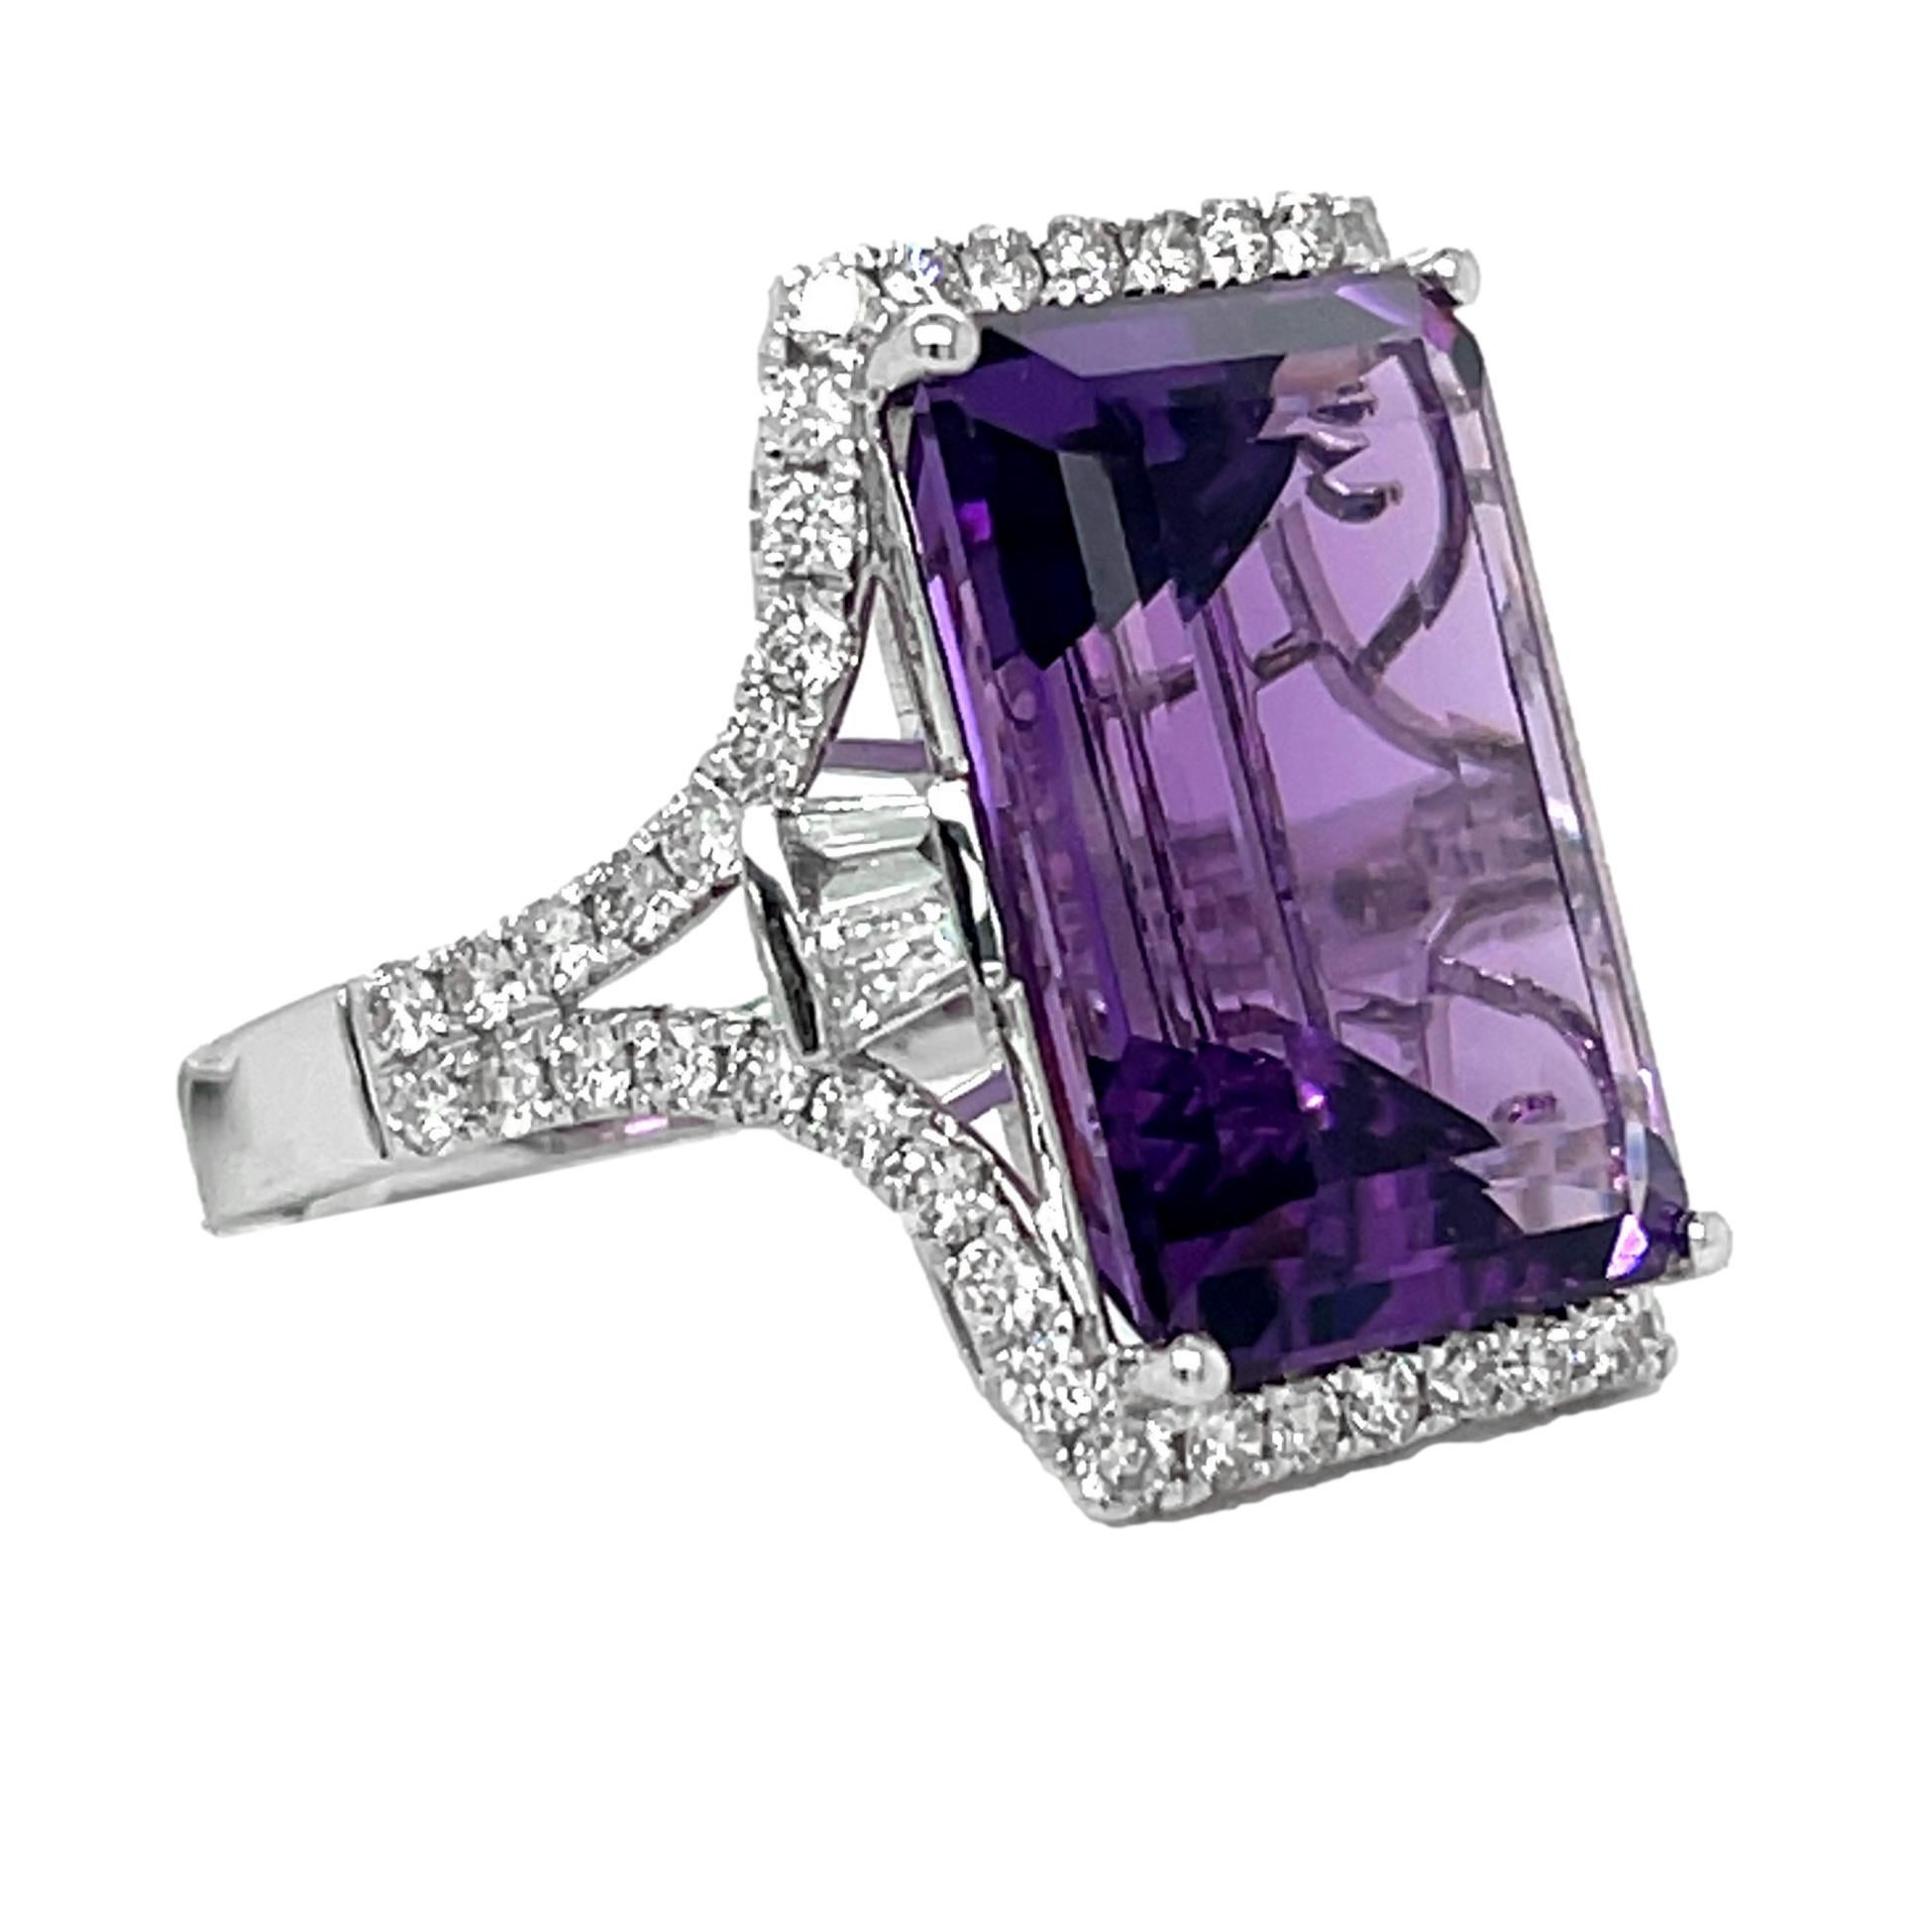 This stunning Statement ring has a AAA quality emerald cut African Amethyst with 4 prong setting in 14 karat white gold. There are 52 shimmering brilliant cut round diamonds and 4 baguette diamonds on the shank. This beautiful ring will be the talk